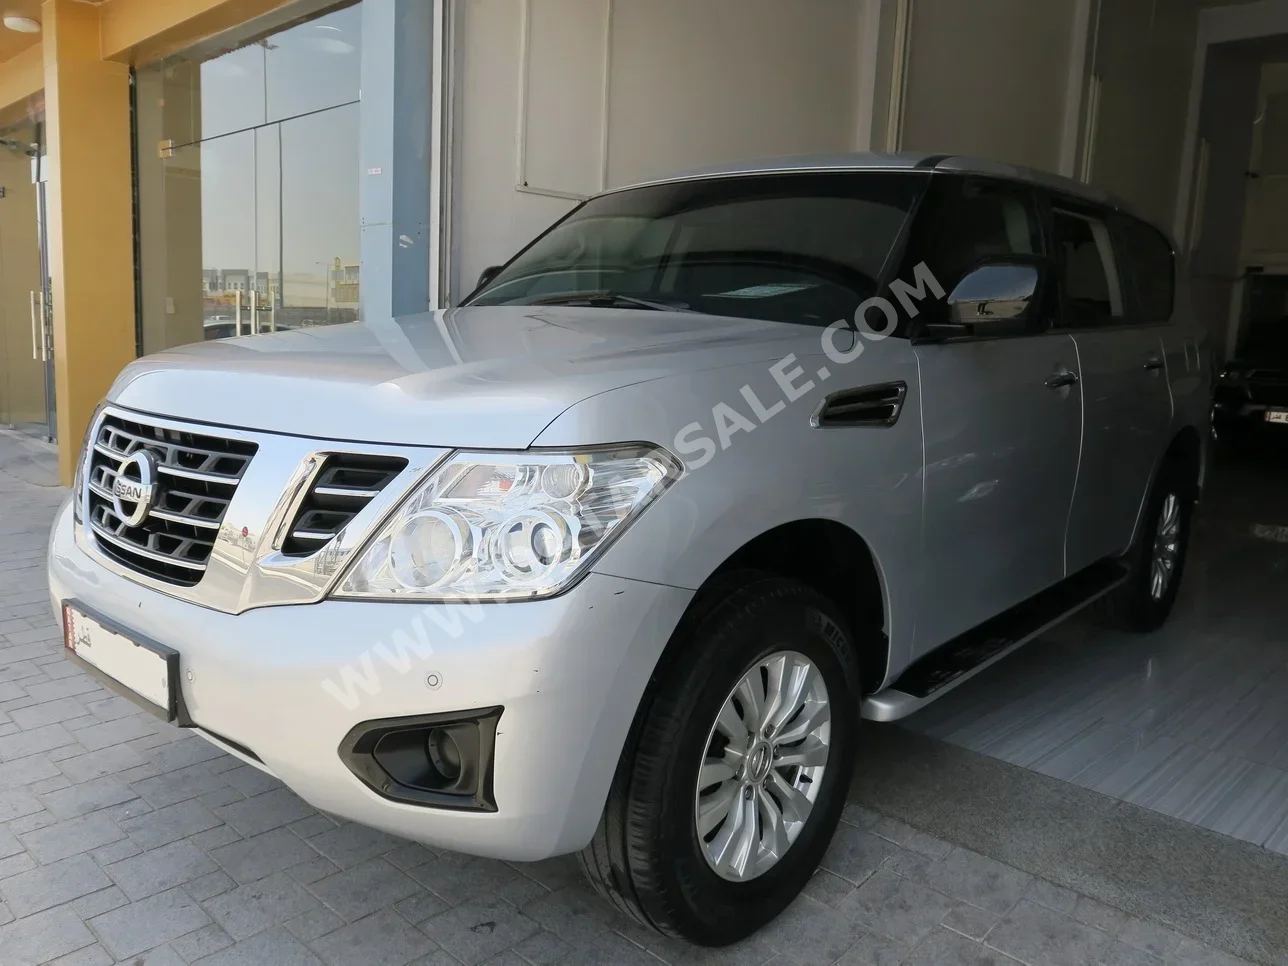 Nissan  Patrol  XE  2017  Automatic  162,000 Km  6 Cylinder  Four Wheel Drive (4WD)  SUV  Silver